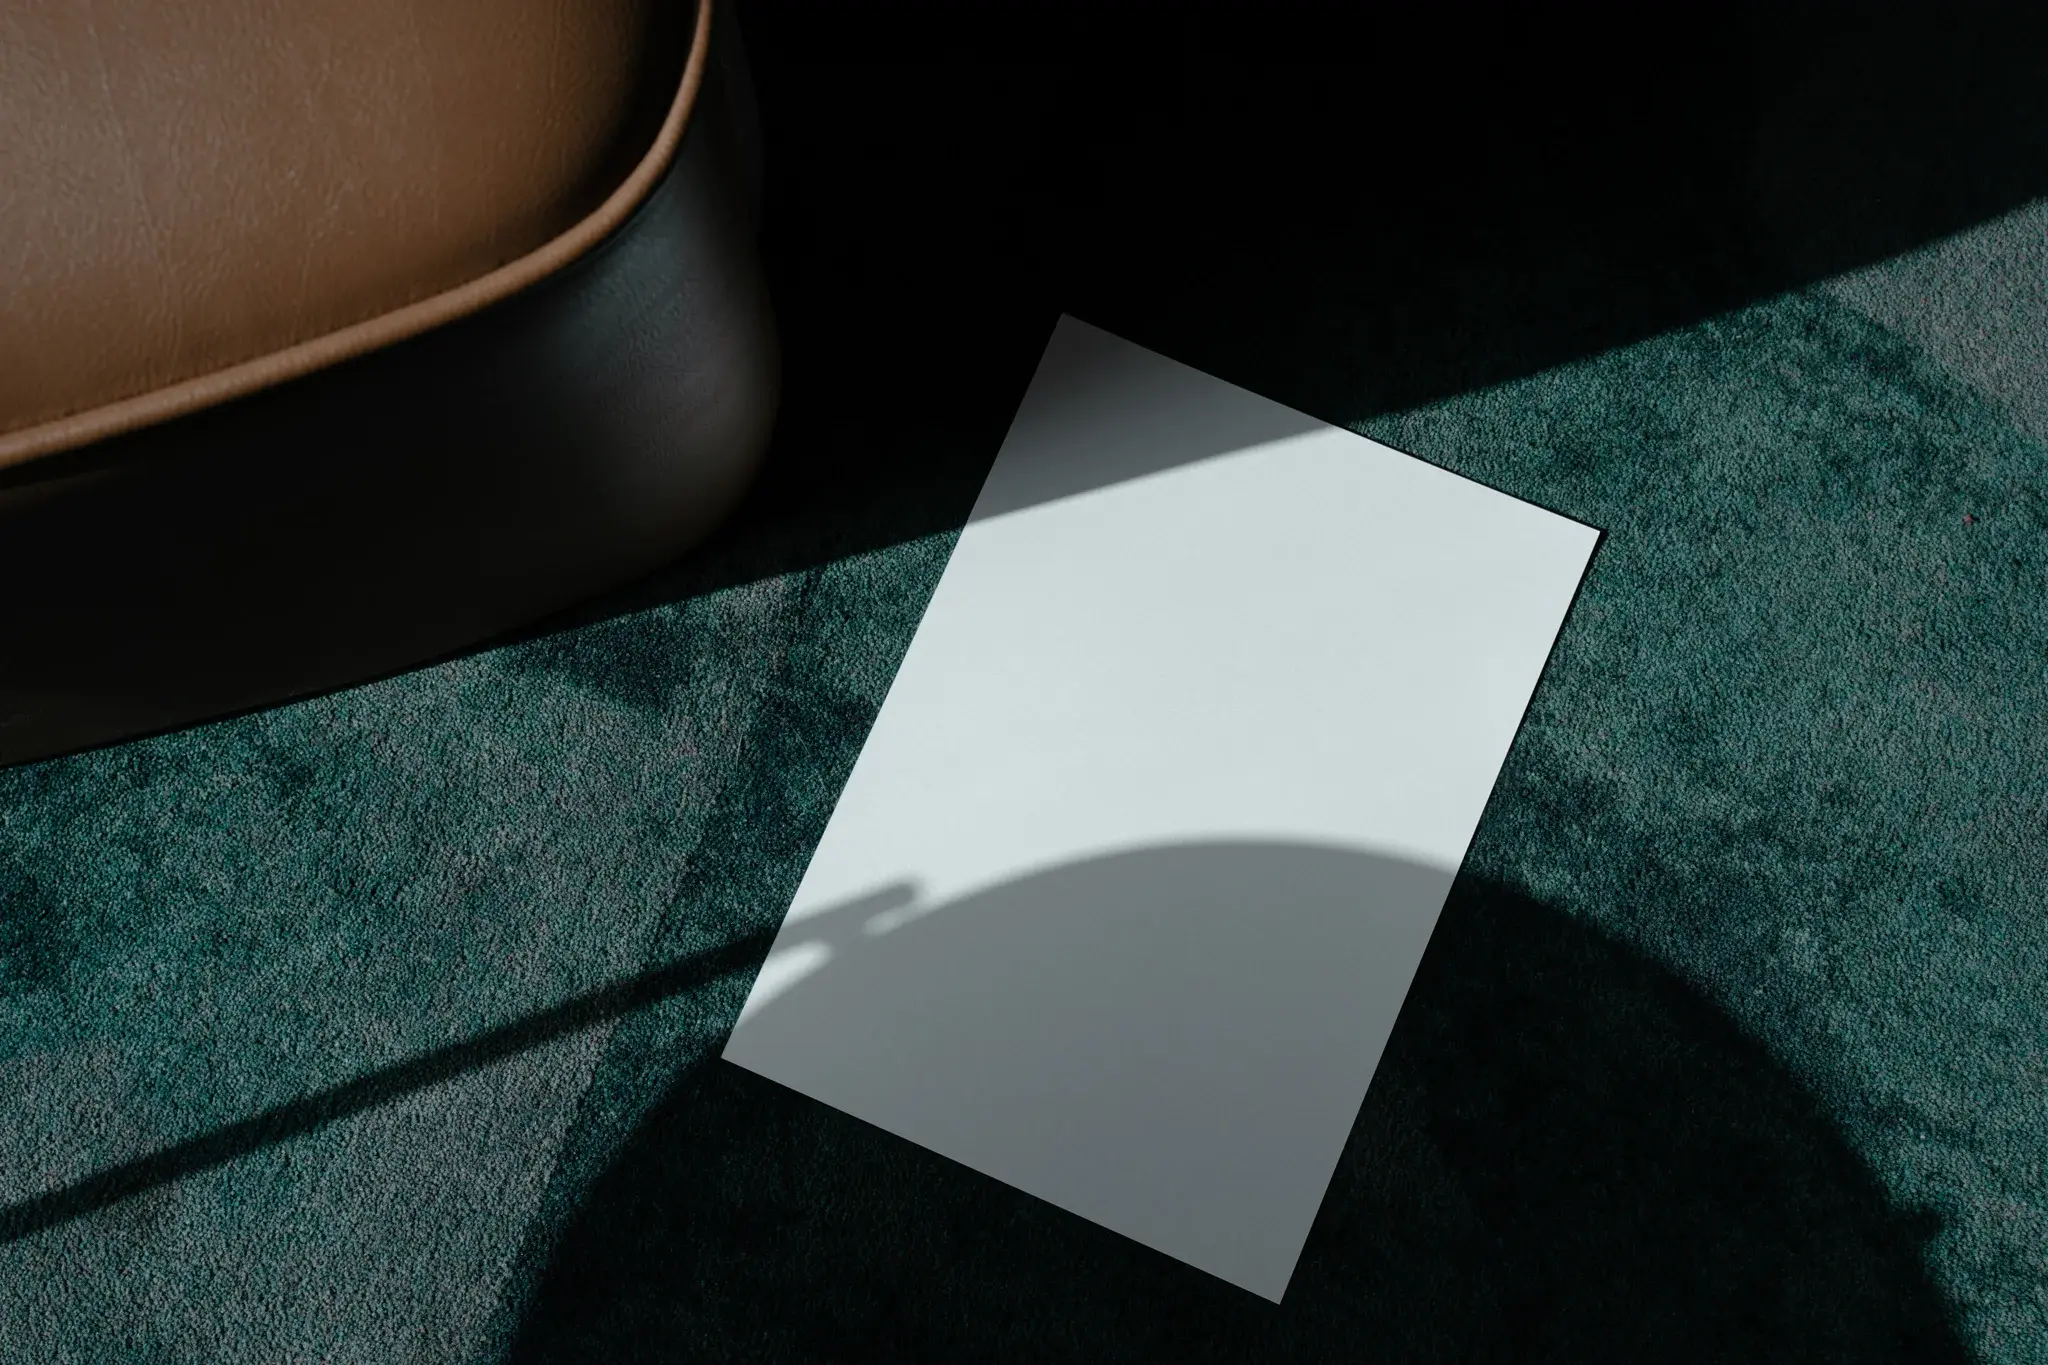 A Format mockup on top a fancy rug with angle shadows